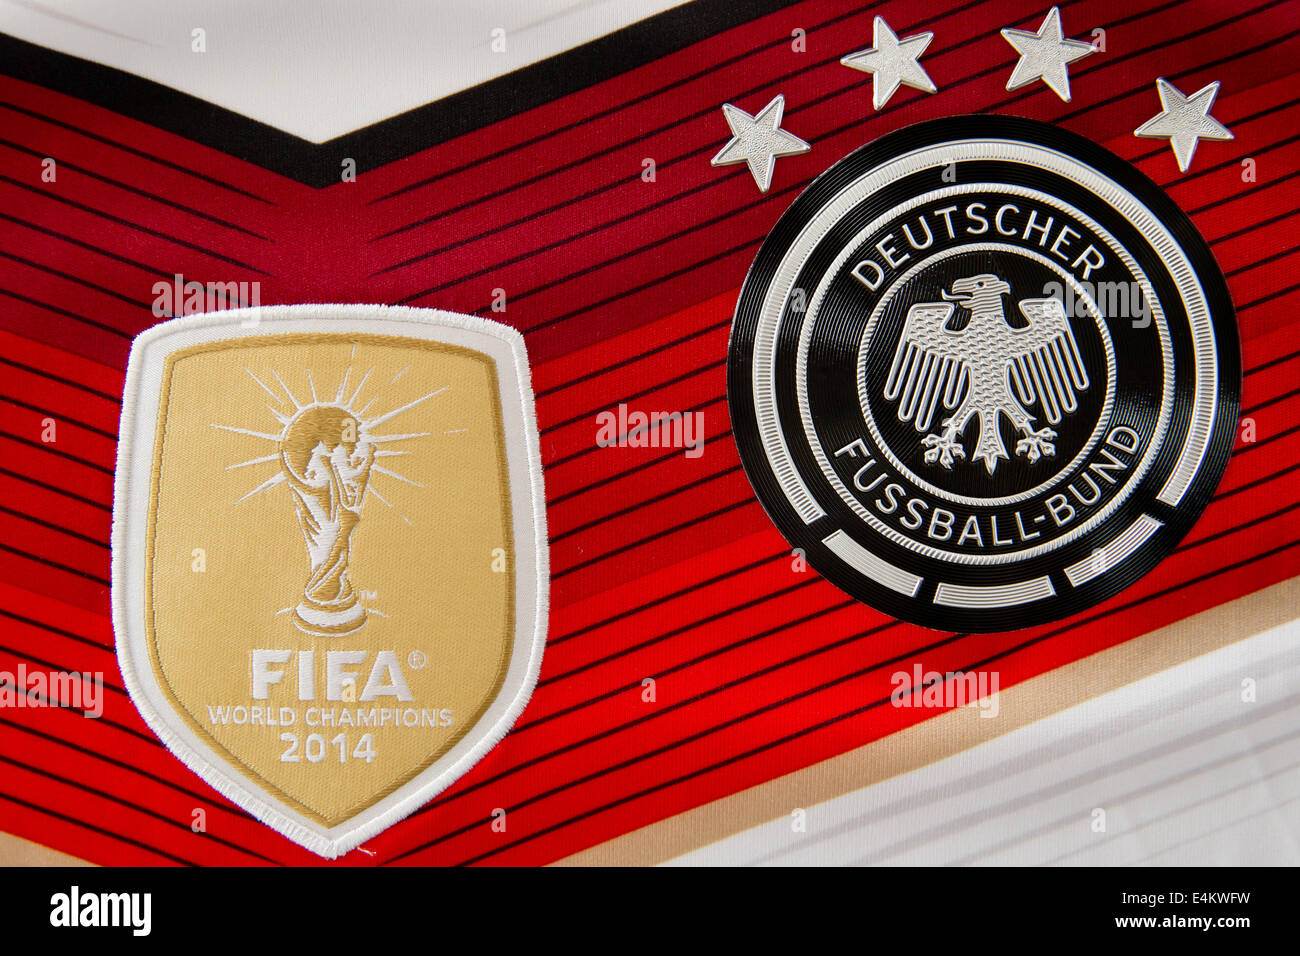 Herzogenaurach, Germany. 14th July, 2014. The fourth star is shown on the official jersey of the German national team in Herzogenaurach, Germany, 14 July 2014. On the left the World Cup trophy with the writing FIFA World Champions 2014 is pictured on the jersey. Germany won the FIFA World Cup 2014 Final 1-0 over Argentina. Every star signifies a won World Cup title. Photo: Daniel Karmann/dpa/Alamy Live News Stock Photo